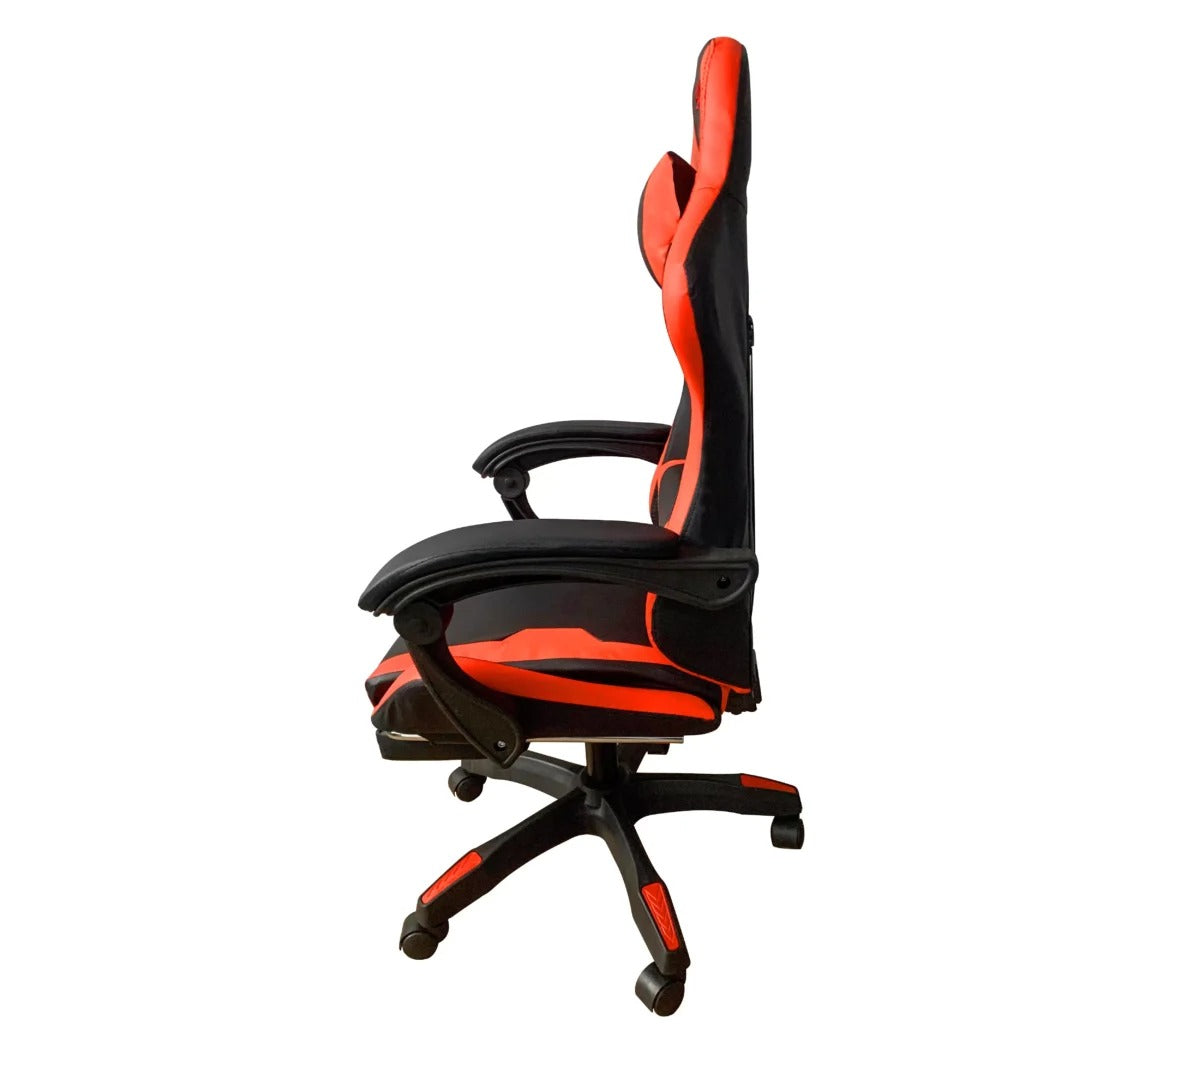 Boost Surge Gaming Chair Price in Pakistan